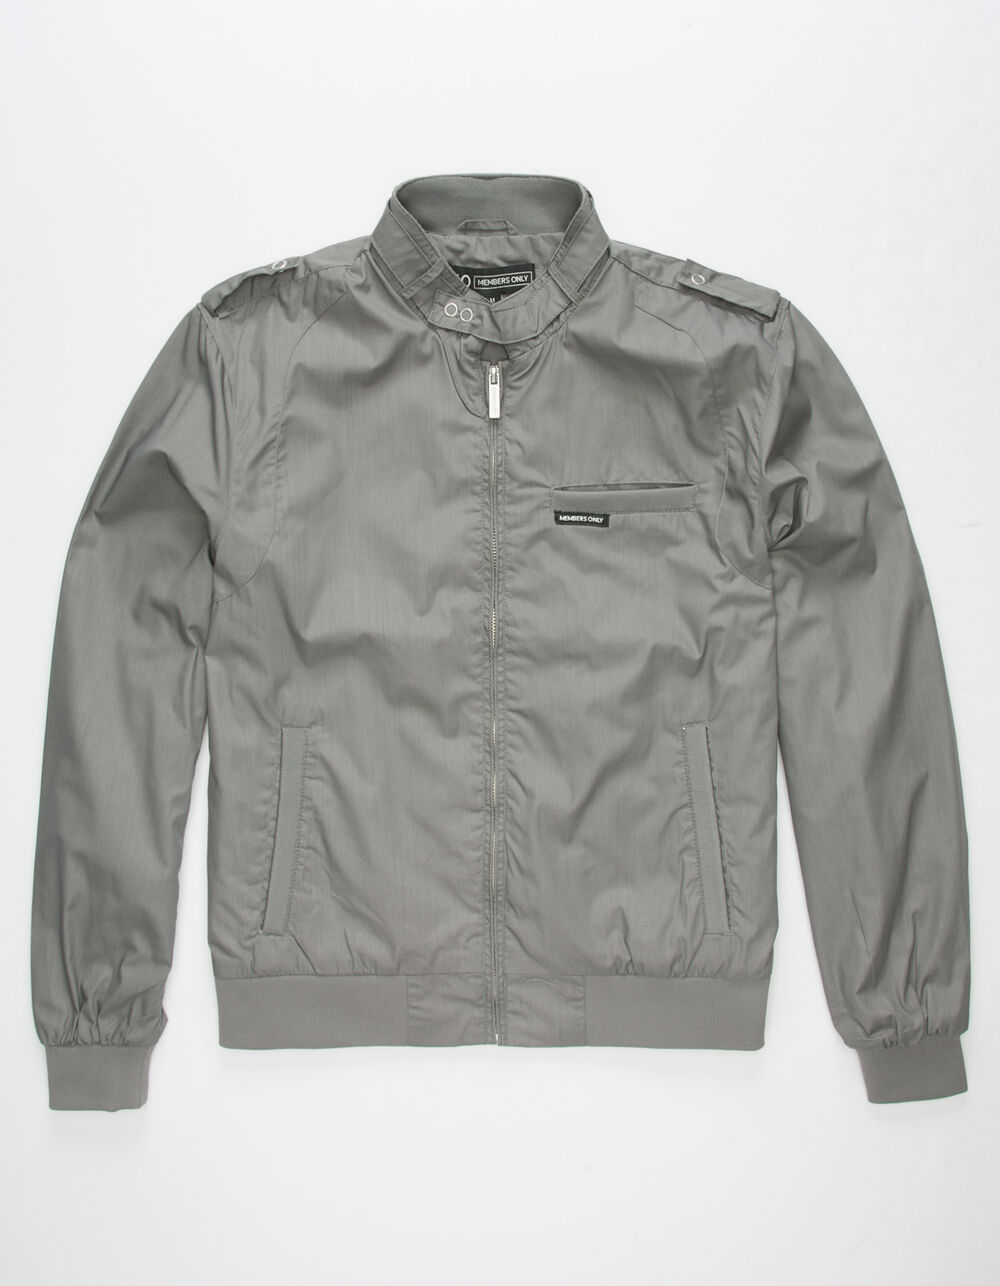 MEMBERS ONLY Gray Classic Trench Racer Jacket XXL 